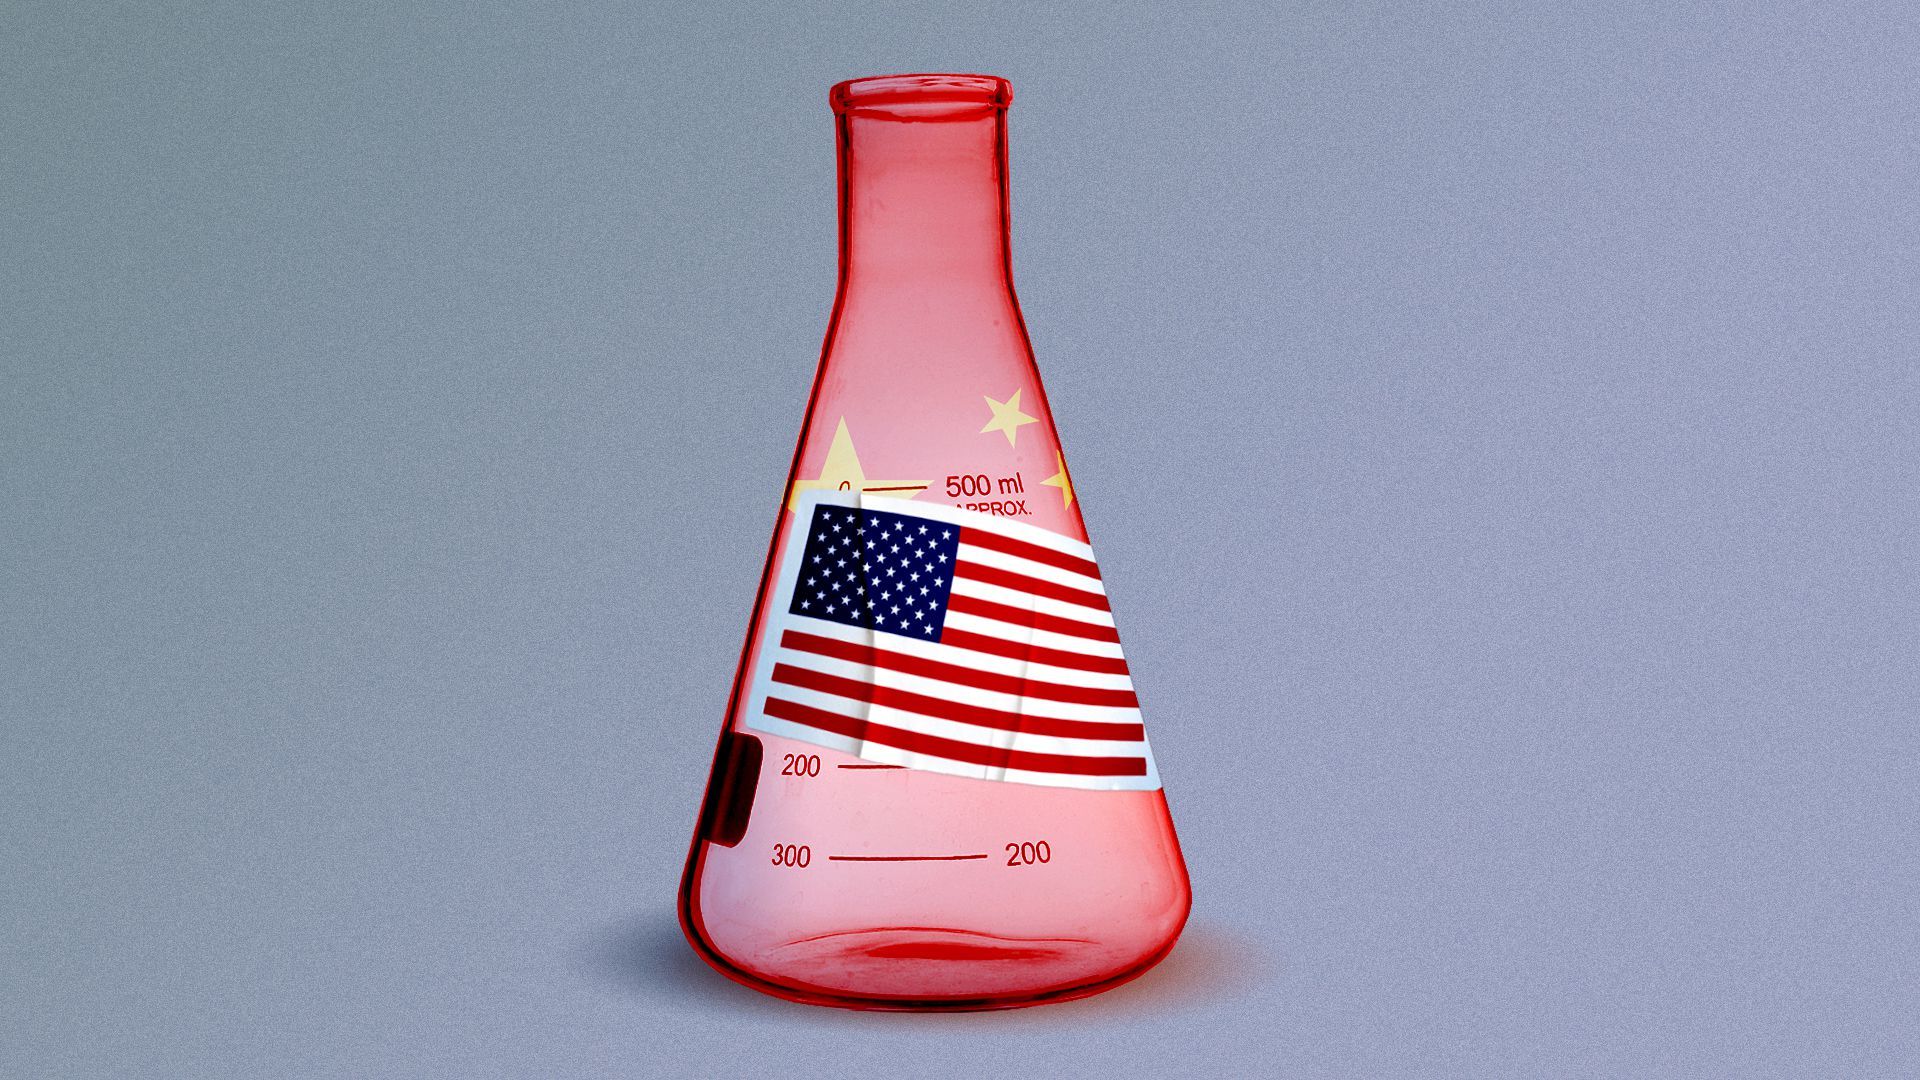 Illustration of a beaker made from a Chinese flag pattern with an American flag sticker on top of it.